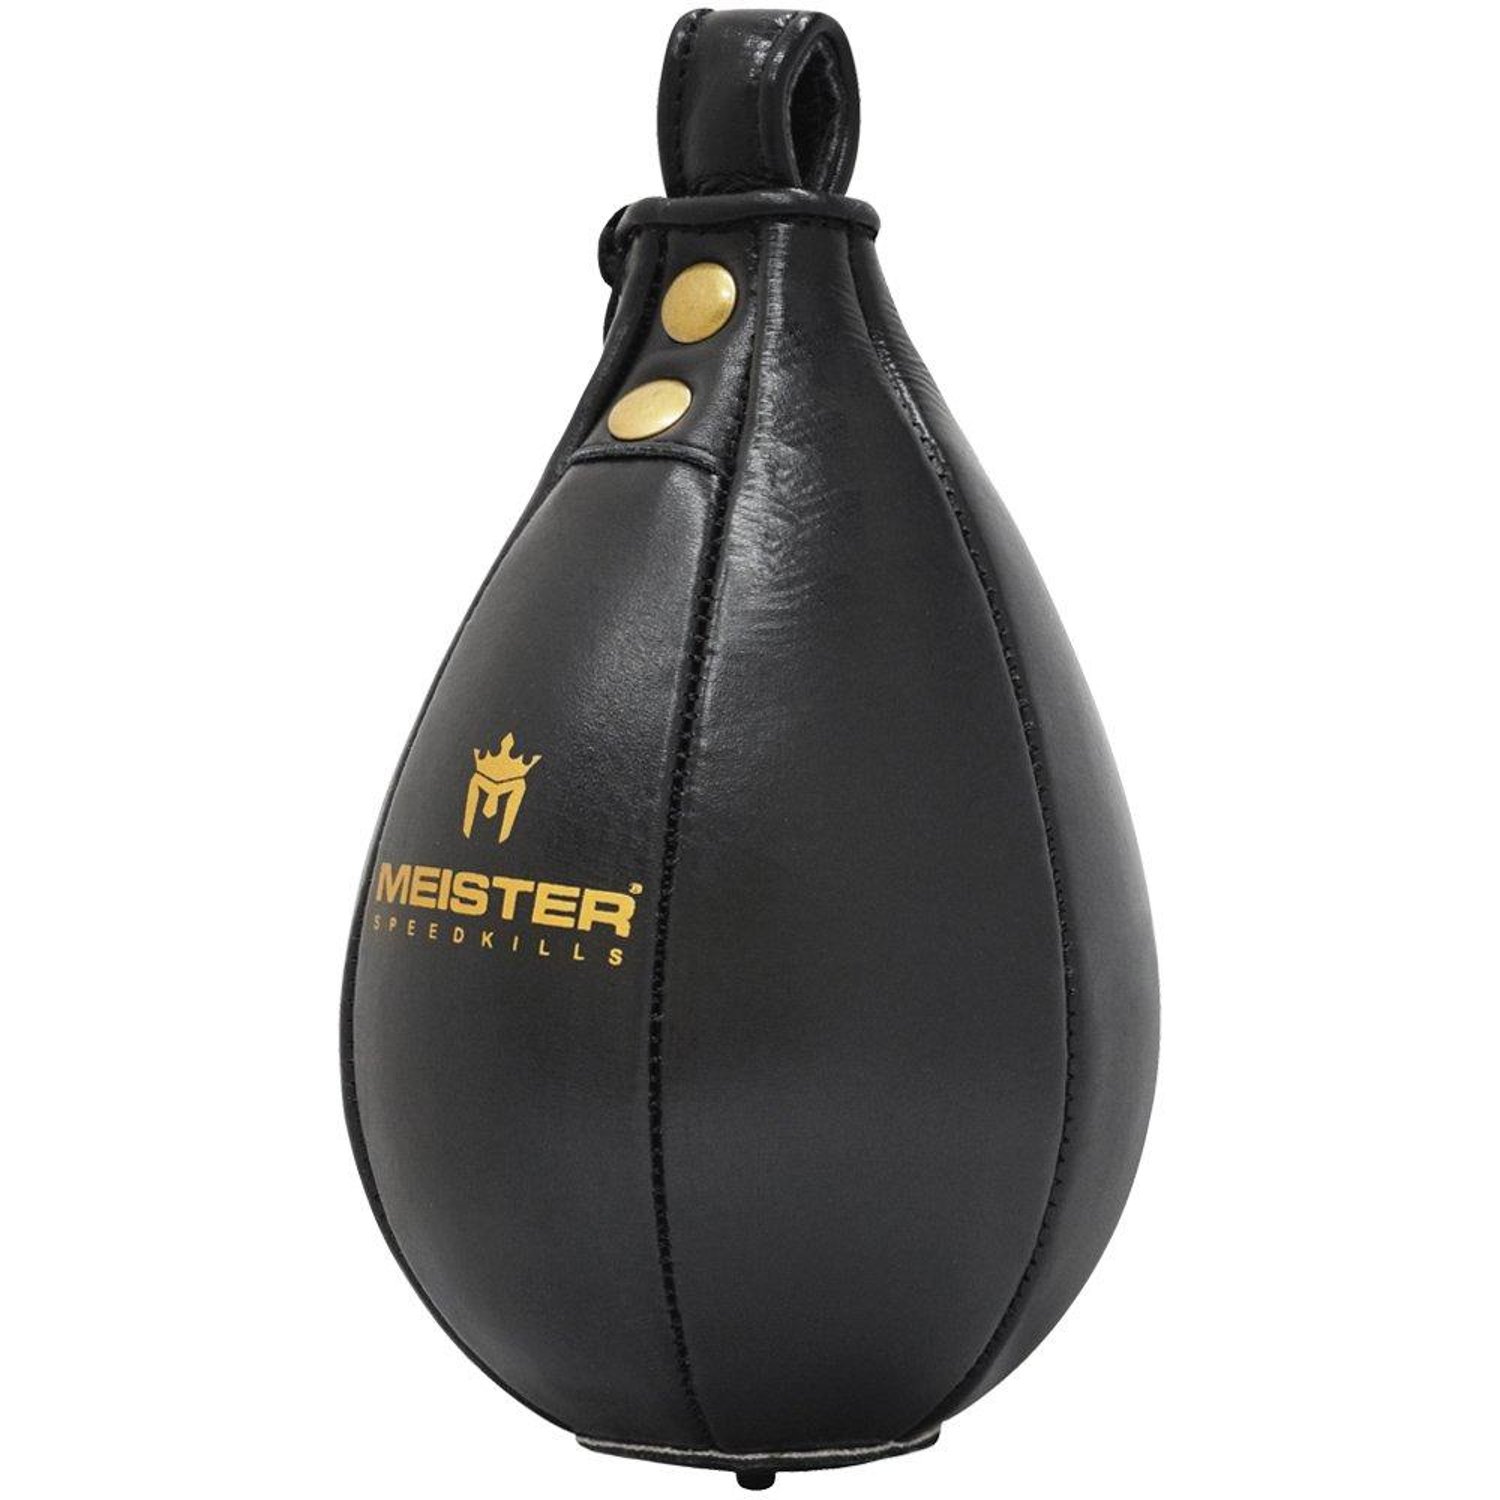 Men Dodge Striking Bag for Workout Pro Boxing Bag for Home Gym Kids MRX Speed Punching Bags Genuine Leather MMA Training Speed Bag Muay Thai SpeedKills Punching Women 